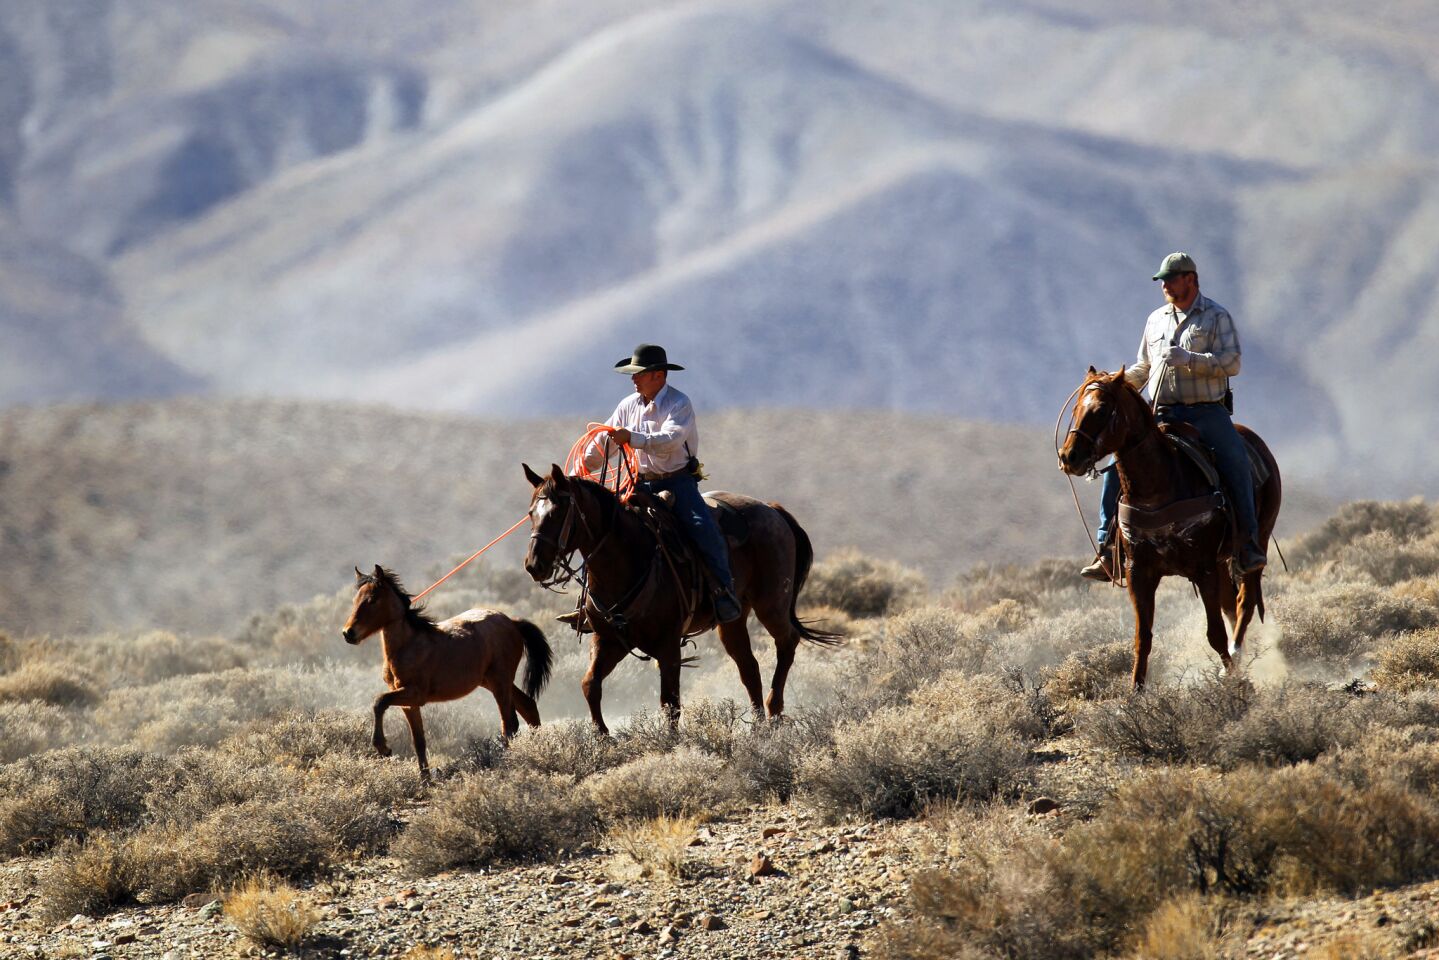 A cowboy working for the Bureau of Land Management lassos a young mustang during a recent roundup.